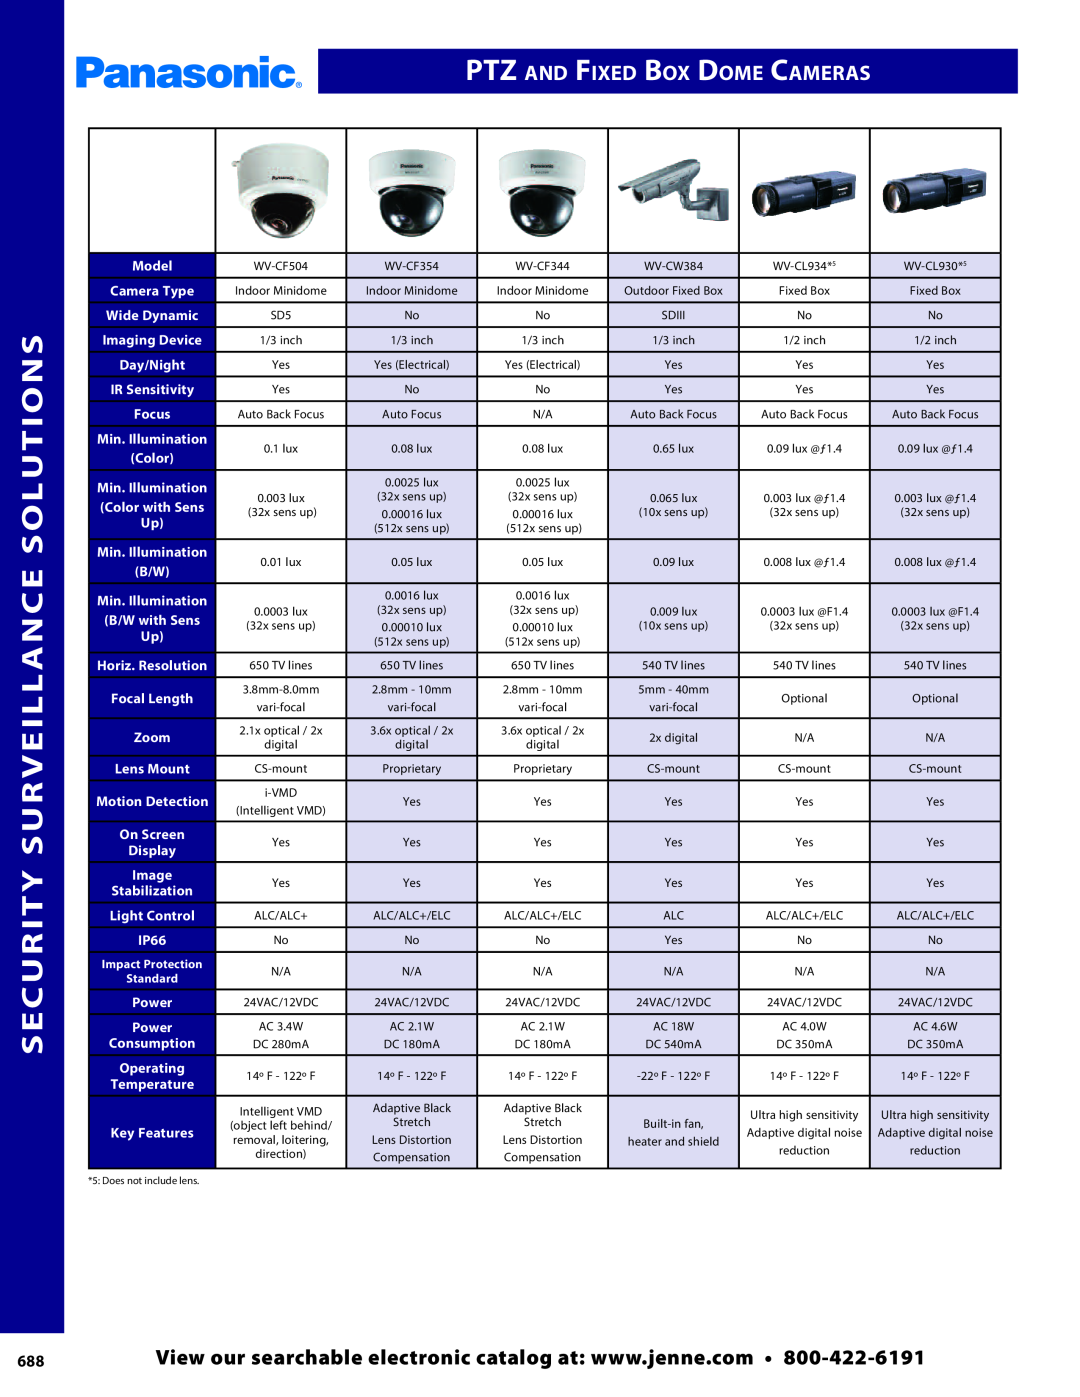 Panasonic PMPU2000 manual PTZ and Fixed Box Dome Cameras, Security Surveillance Solutions, Model, Day/Night, IP66 